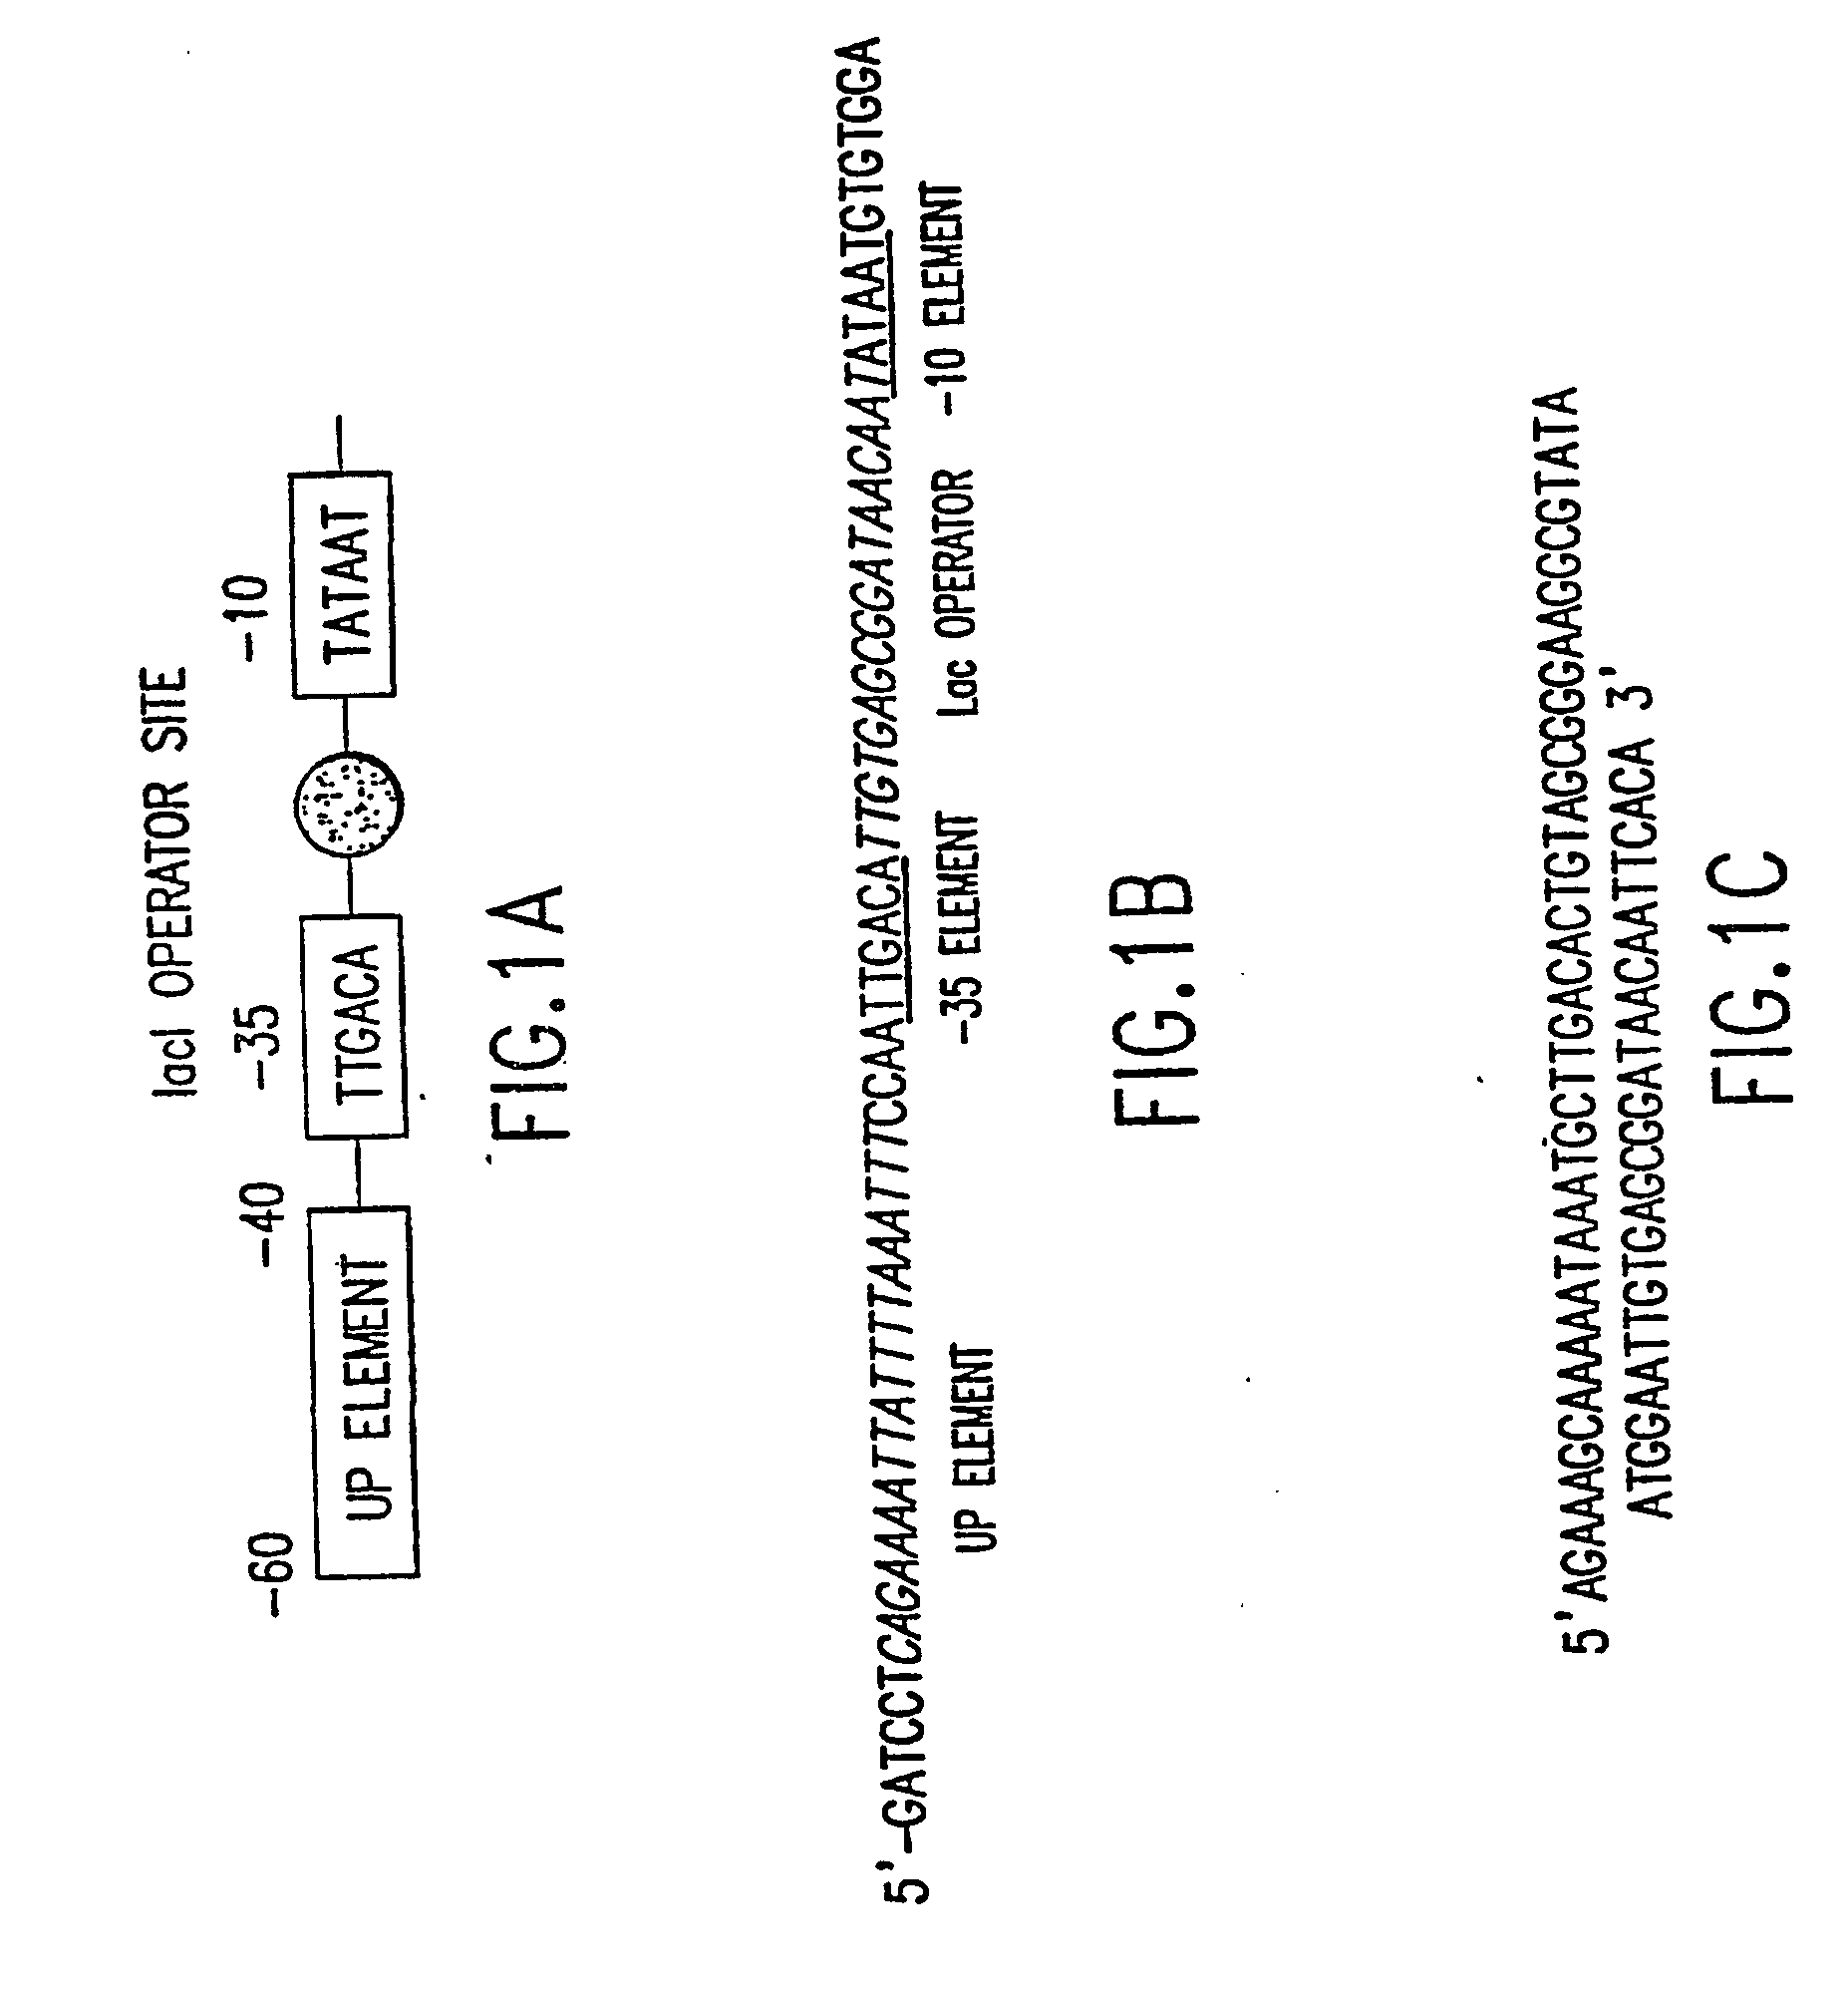 Tissue-specific and pathogens-specific toxic agents, ribozymes, dnazymes and antisense oligonucleotides, and methods of use thereof